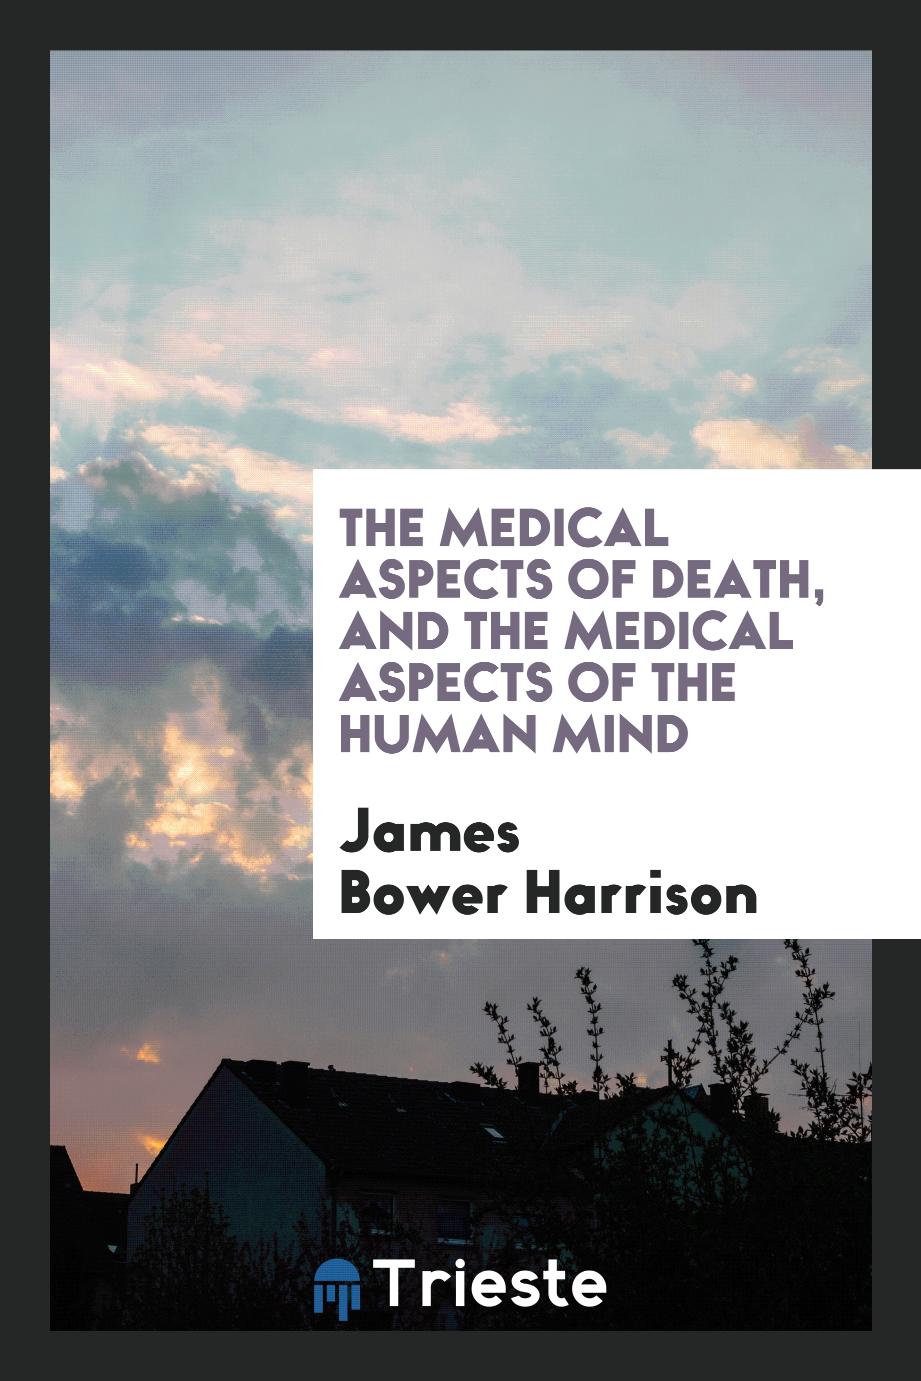 The medical aspects of death, and the medical aspects of the human mind